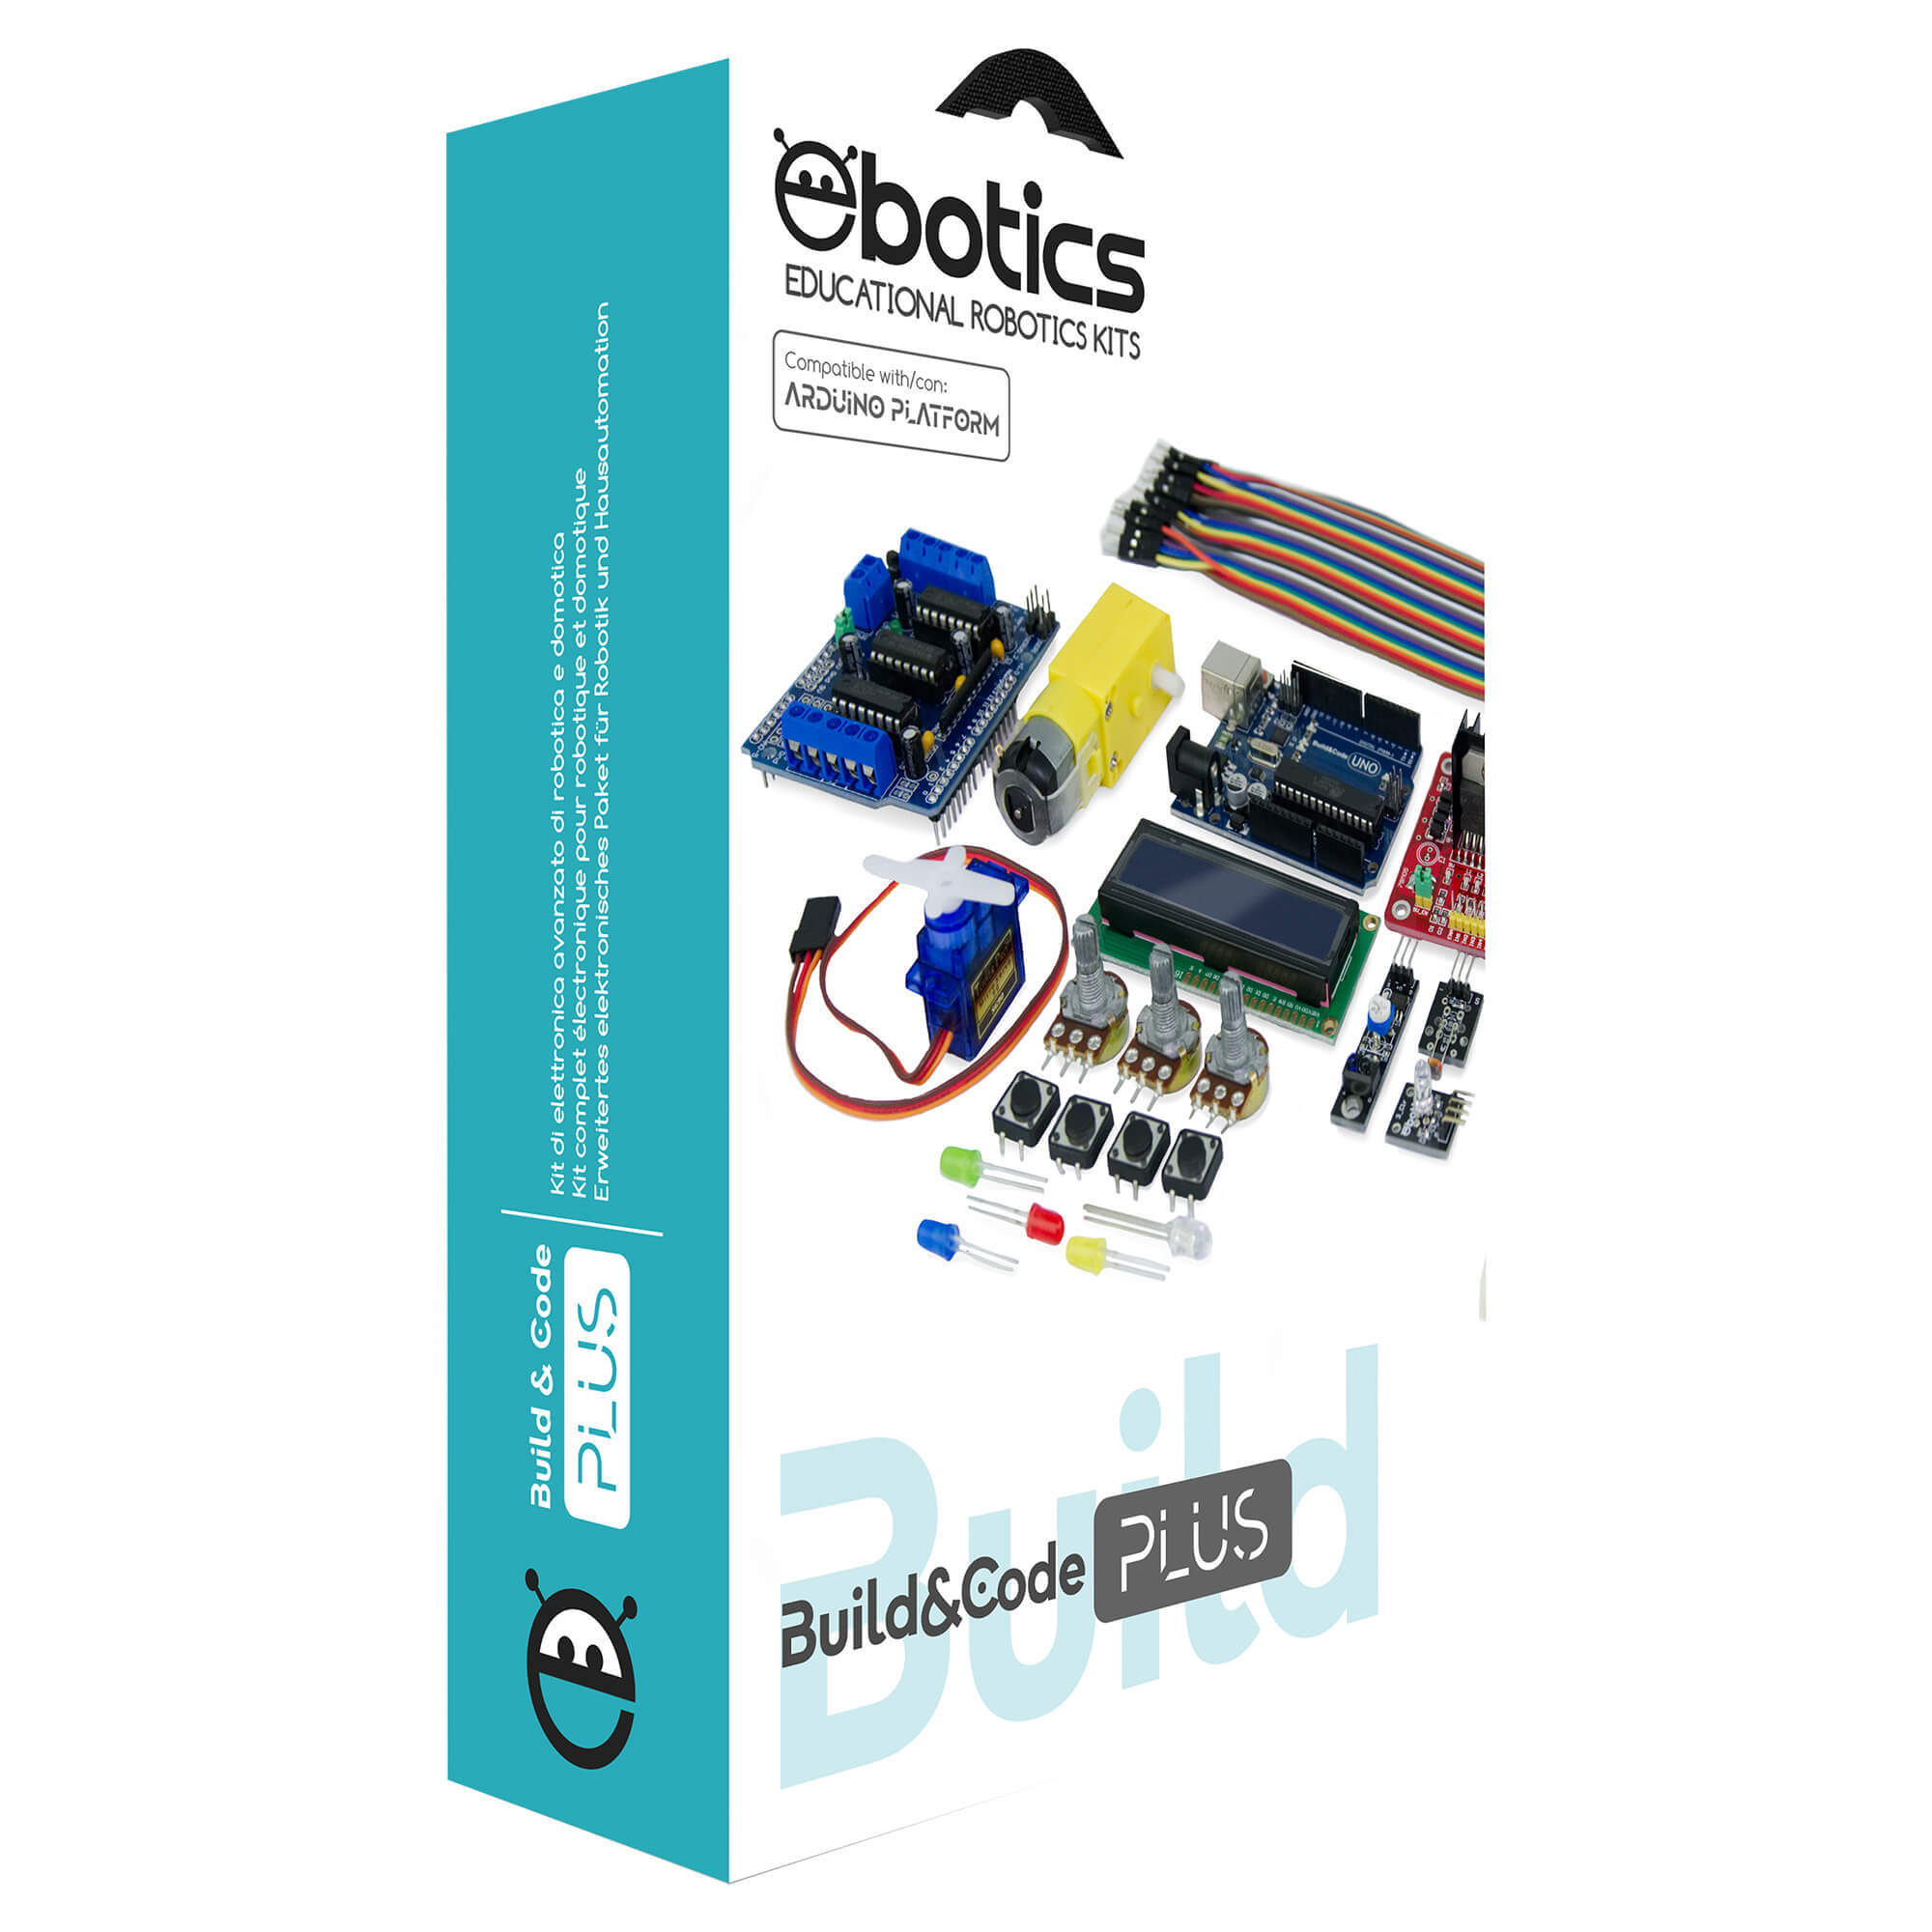 Build&Code Plus from Ebotics Arduino Discovery